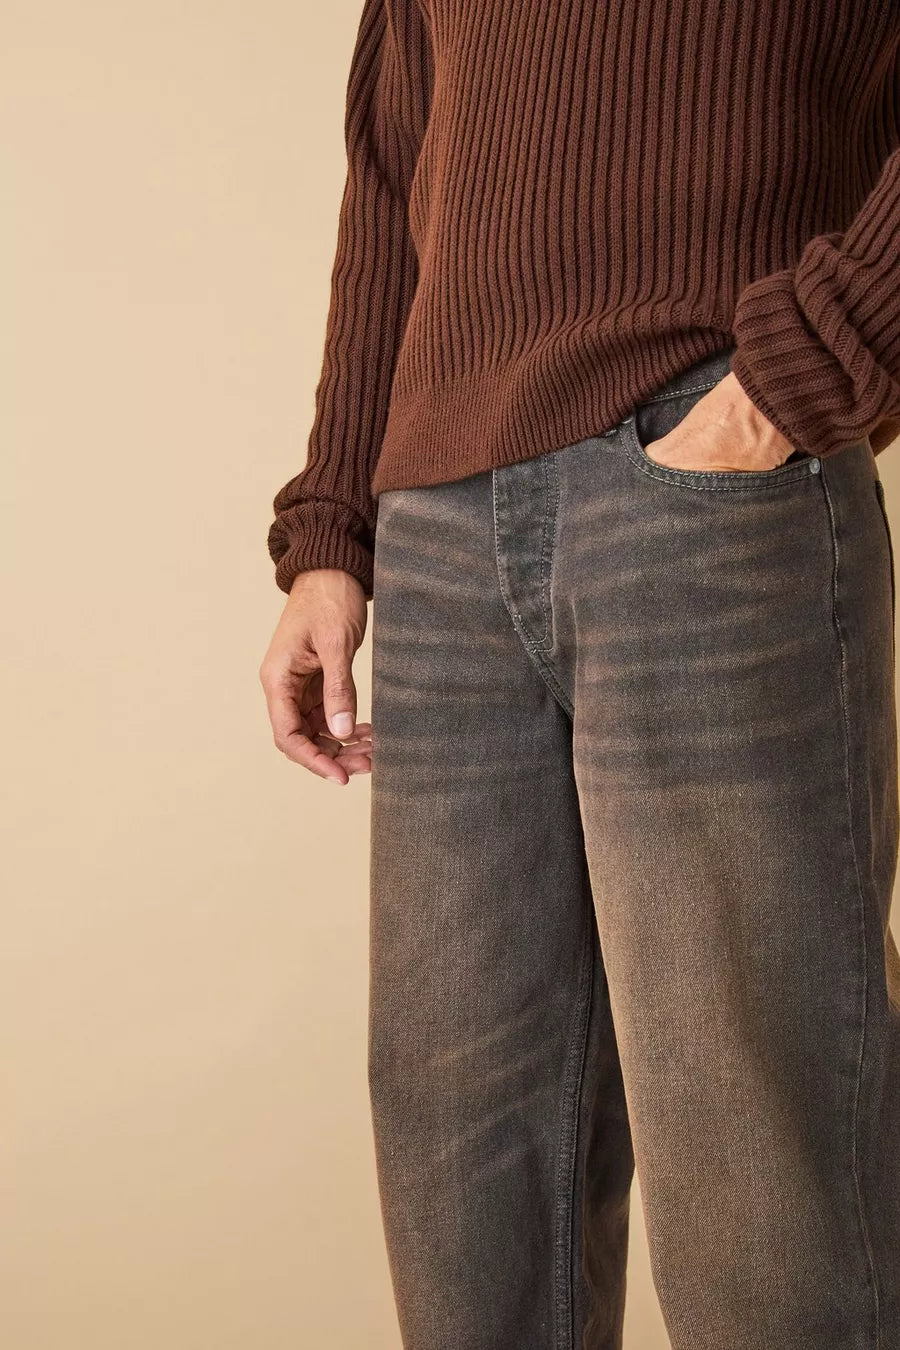 BAGGY RIGID WASHED JEANS